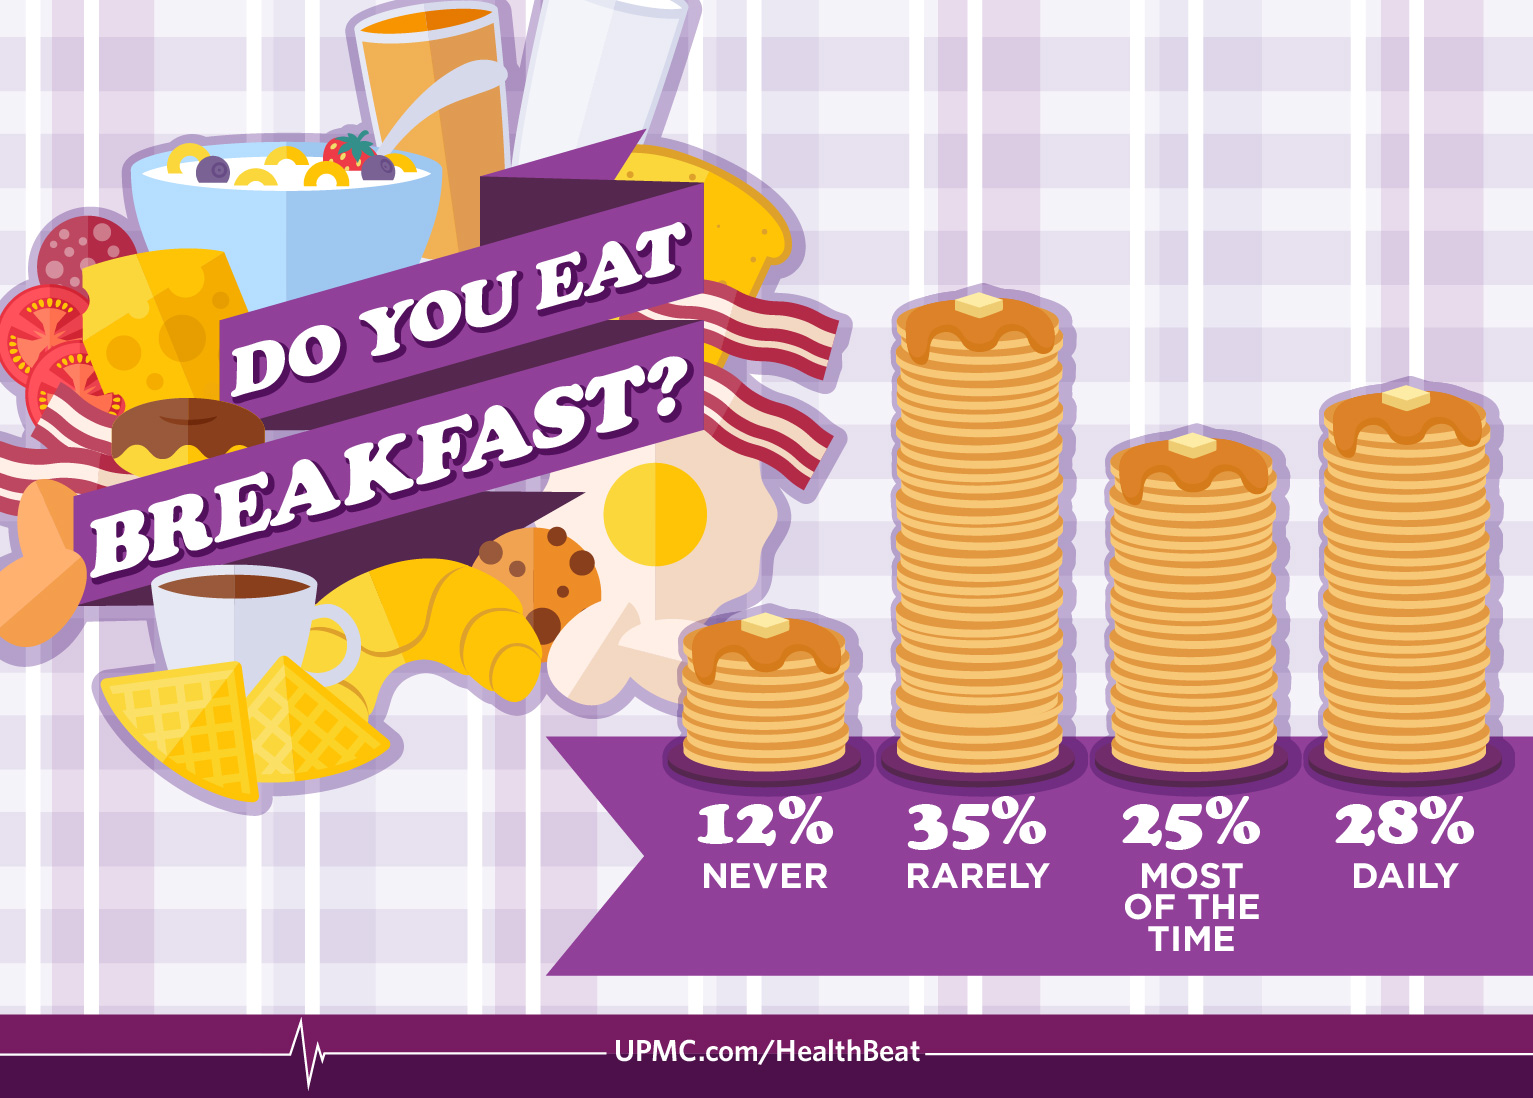 Find out why breakfast is the most important meal of the day